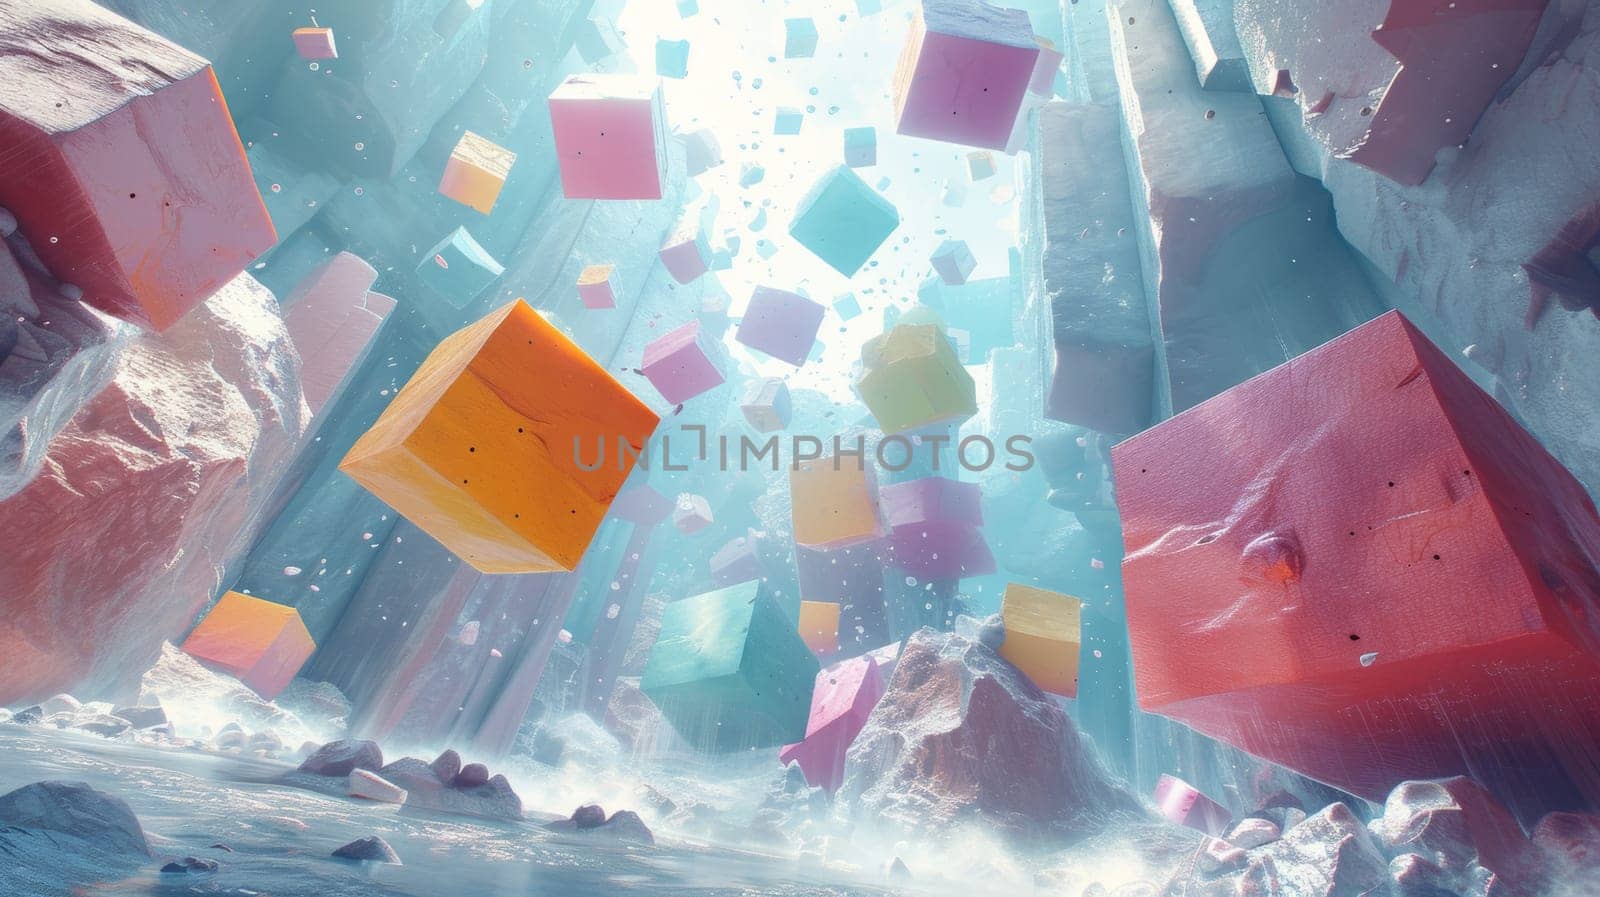 A bunch of colorful cubes are floating in a watery area